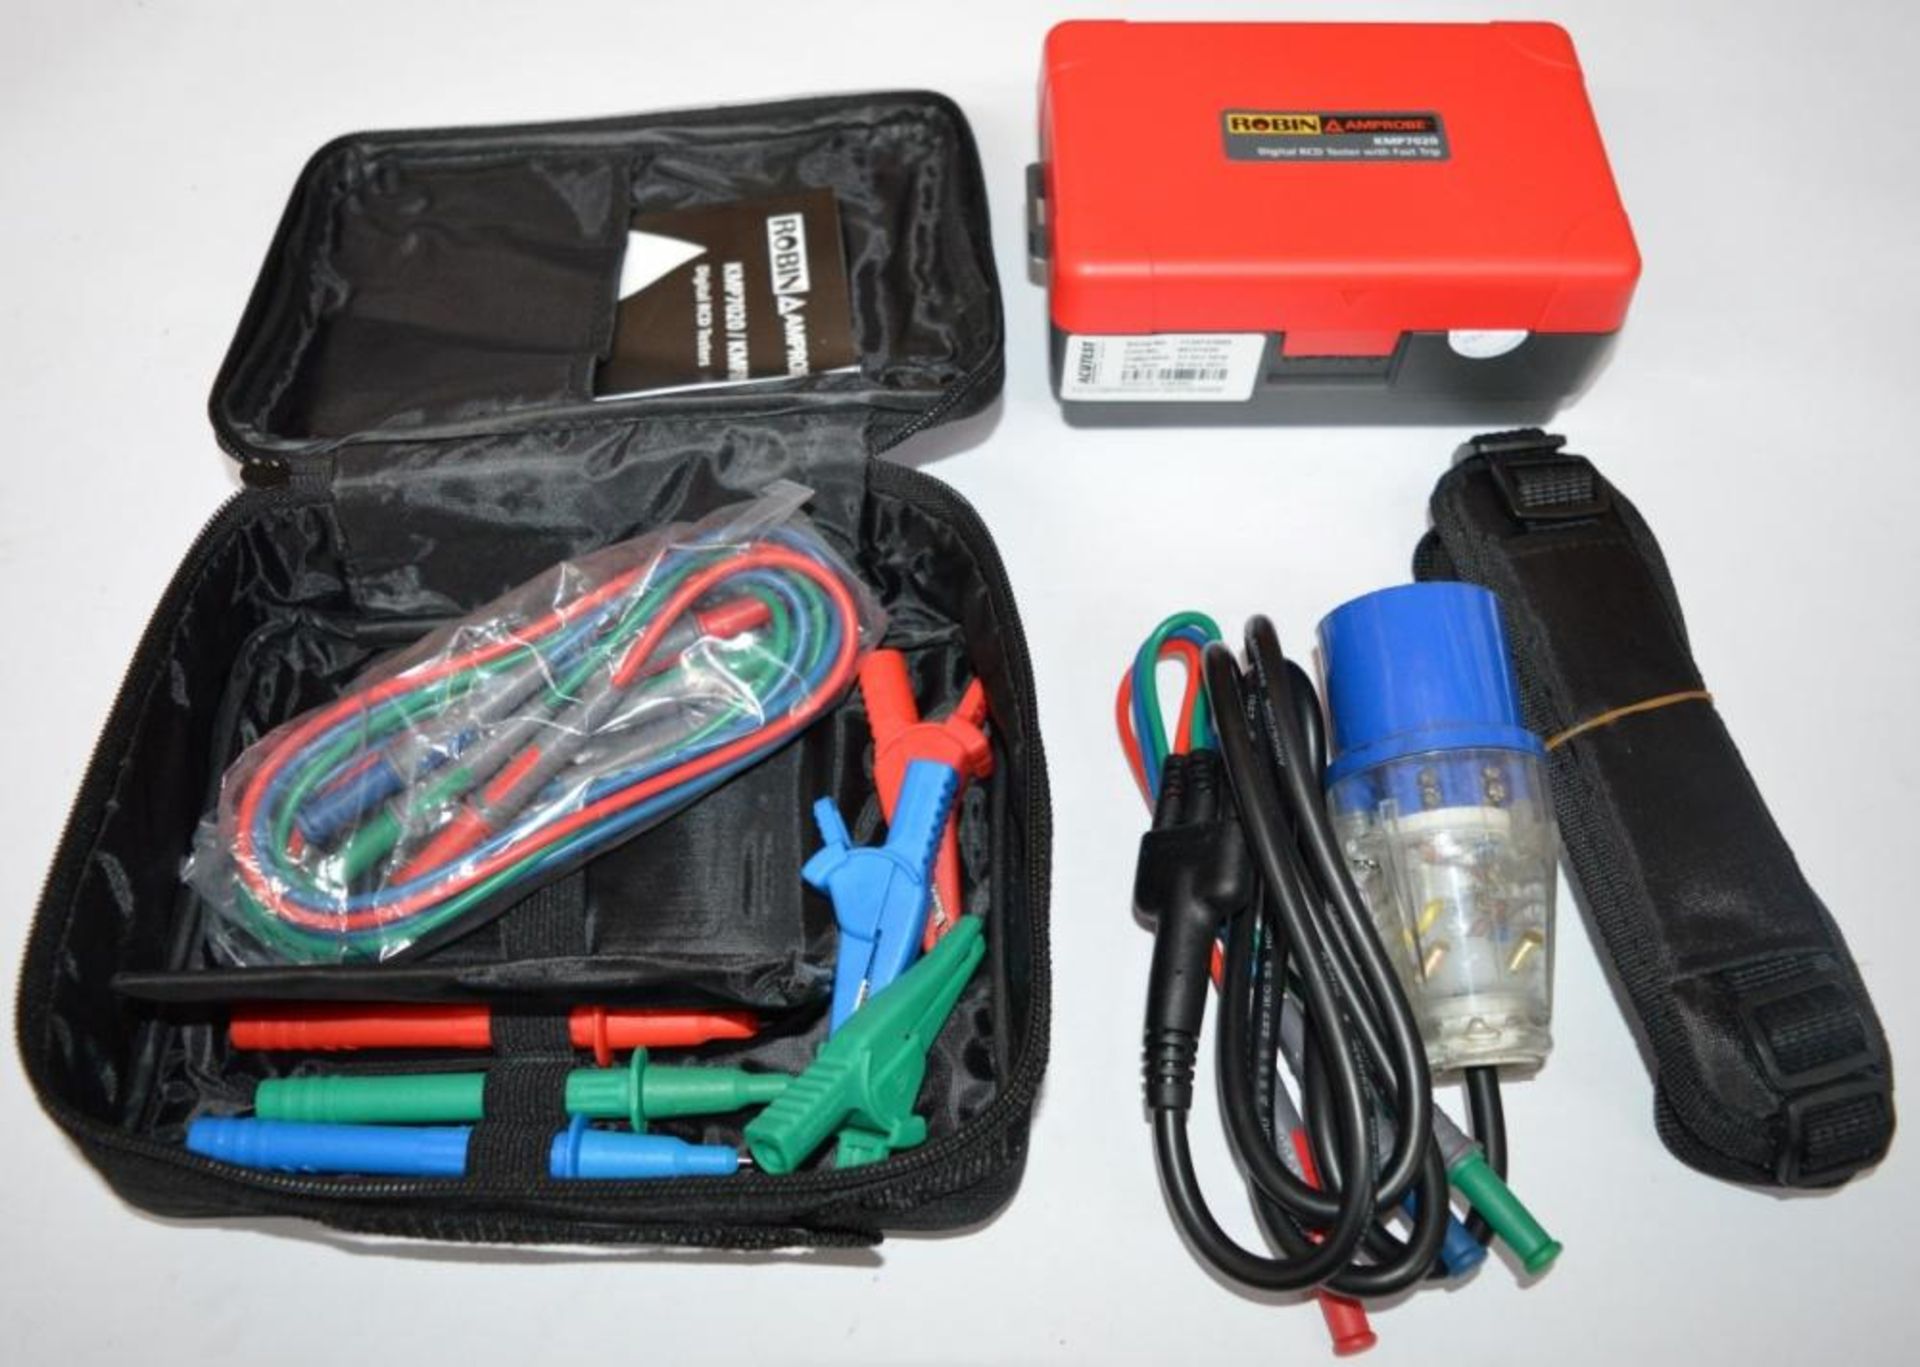 1 x Robin Amprobe Digital RCD Tester With Fast Trip - Model KMP7020 - Boxed With All Accessories - C - Image 2 of 12